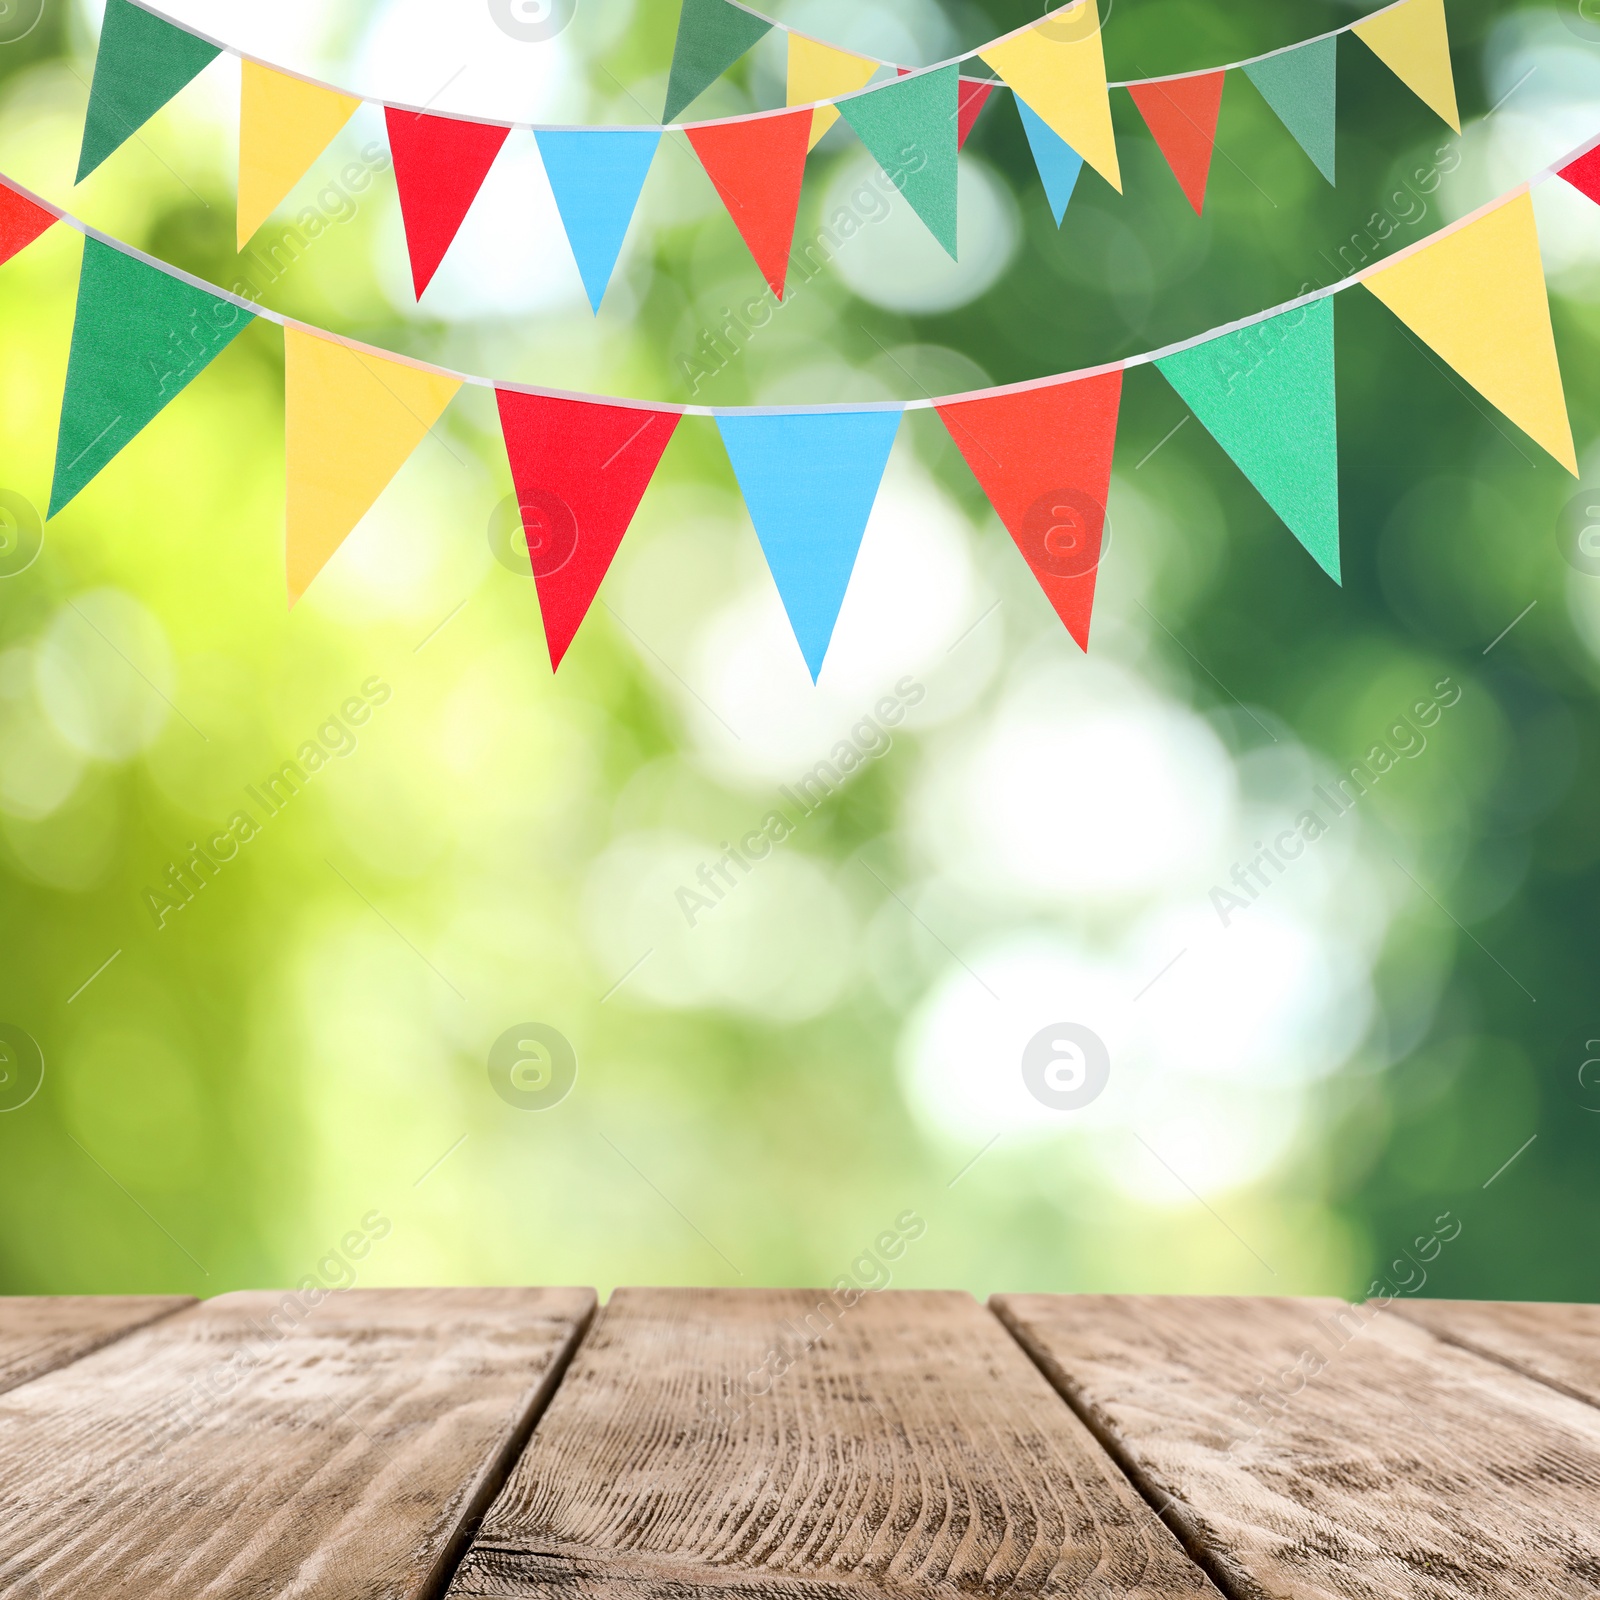 Image of Empty wooden table and decorative bunting flags outdoors